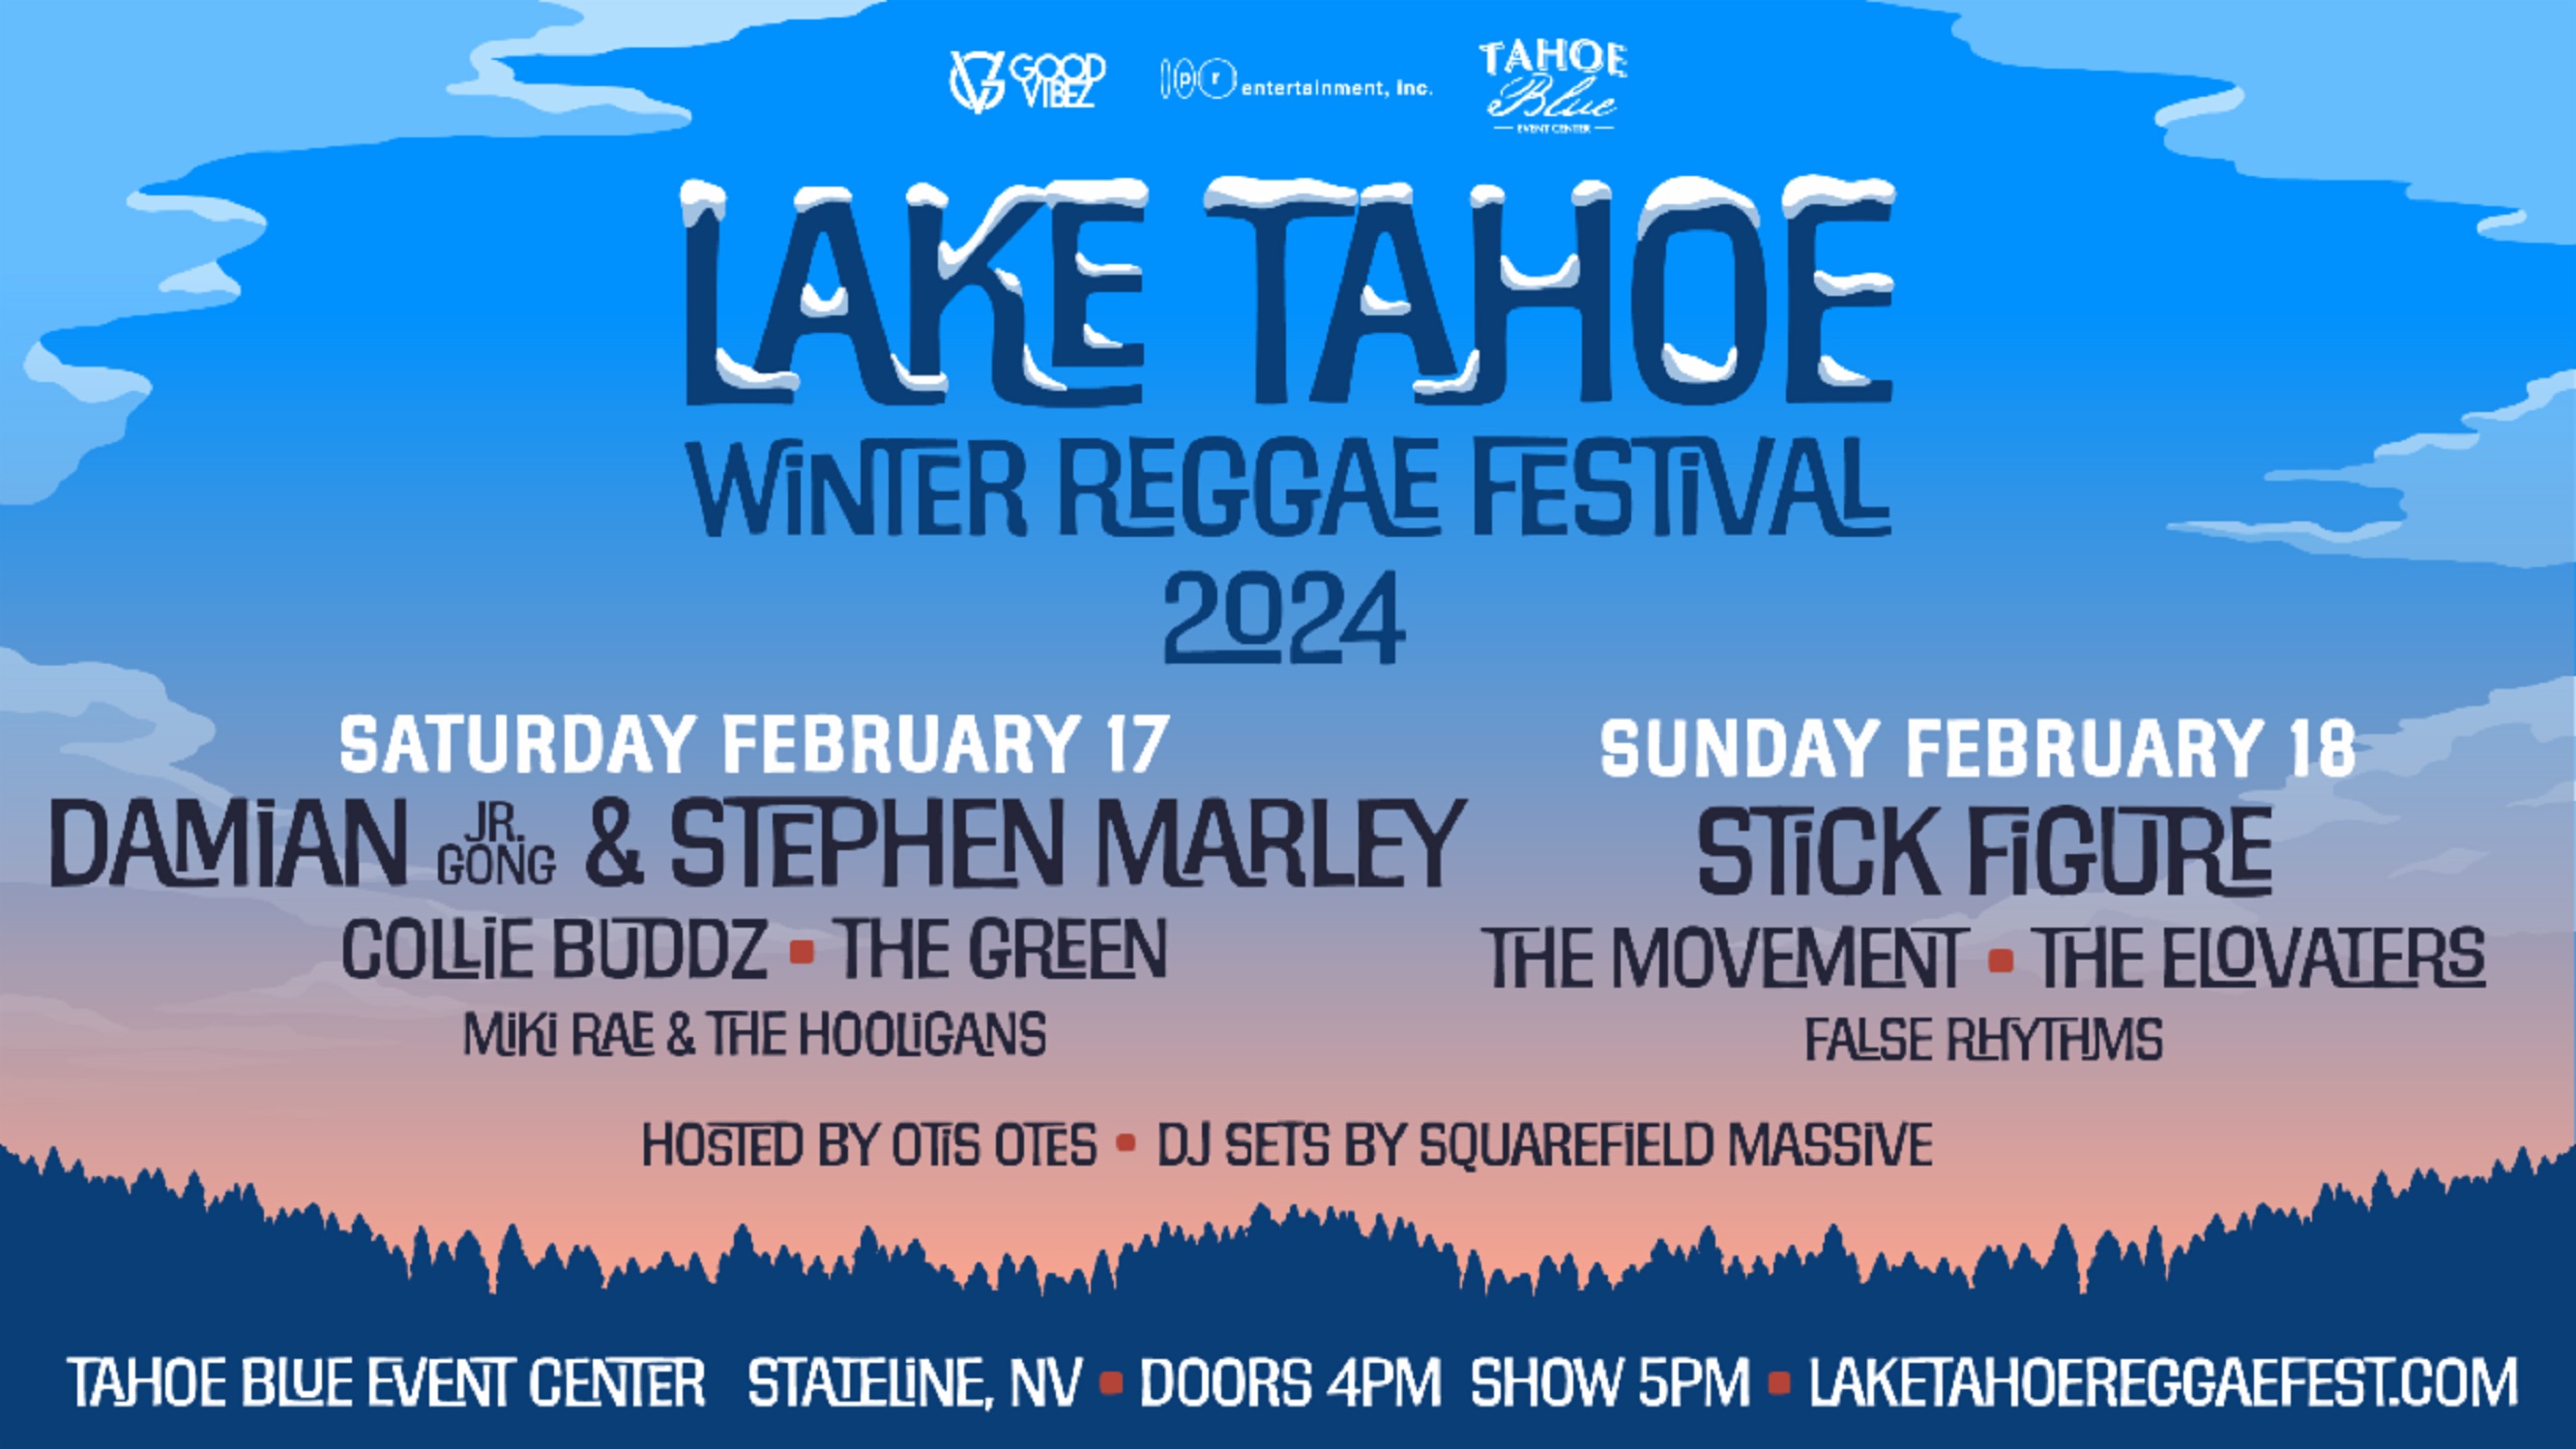 Lake Tahoe Winter Reggae Festival 2024 Lineup To Include Damian 'Jr Gong' & Stephen Marley, Stick Figure, Collie Buddz, And More